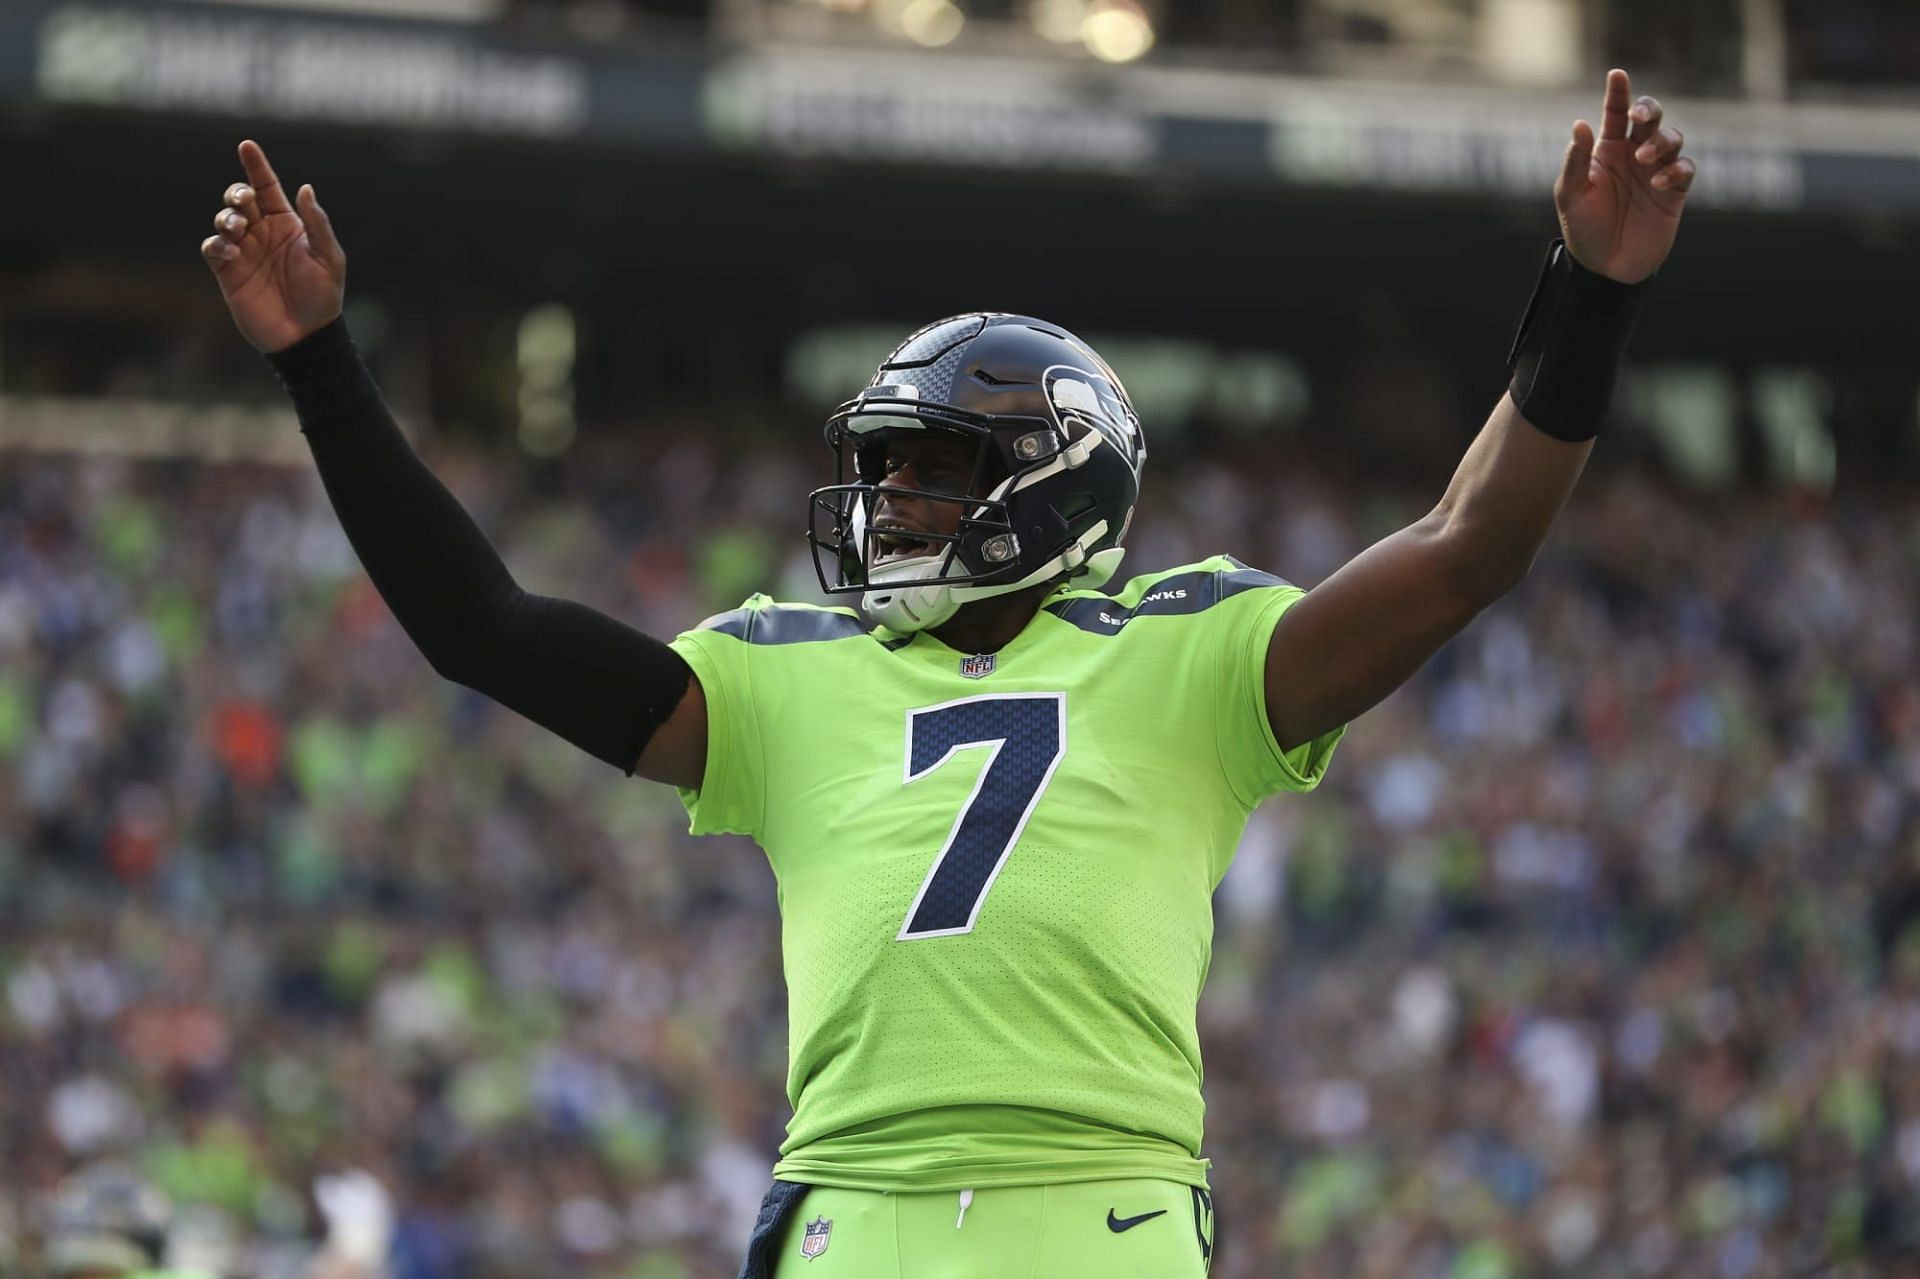 Can Geno Smith continue to lead the surprising Seattle Seahawks?